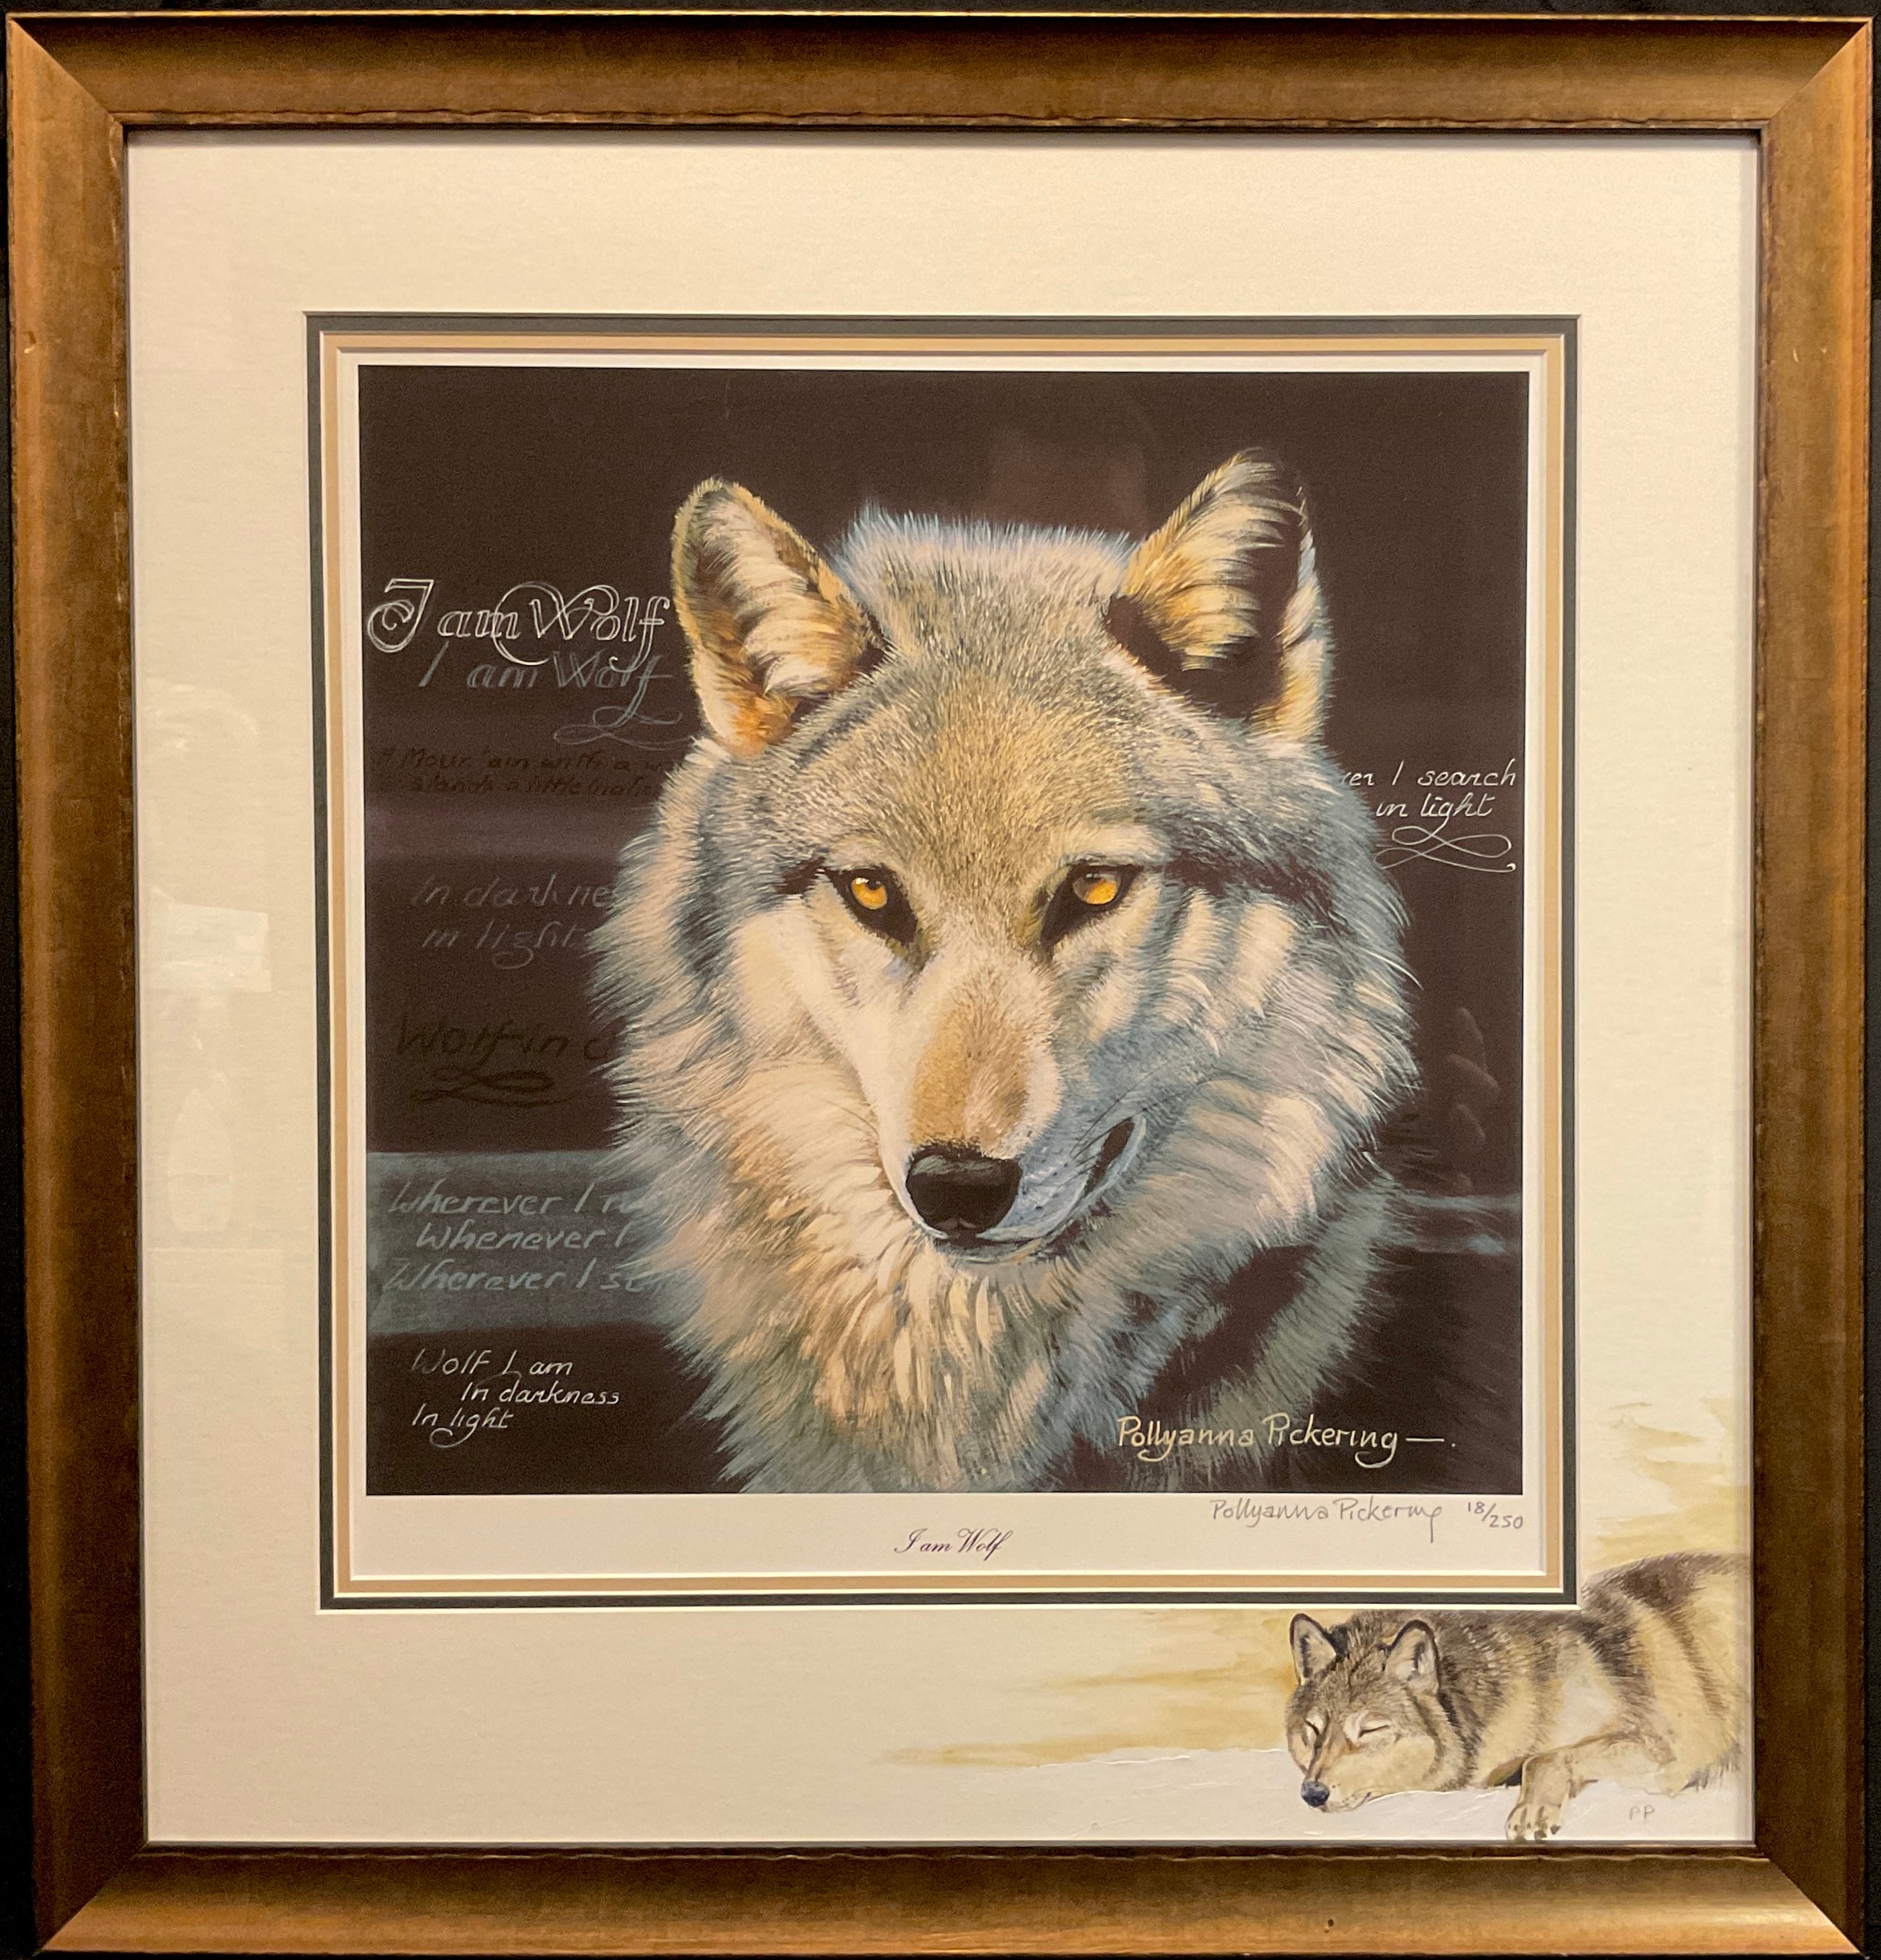 Pollyanna Pickering (1942 - 2018) I Am Wolf, limited edition print 18/250, signed in pencil to